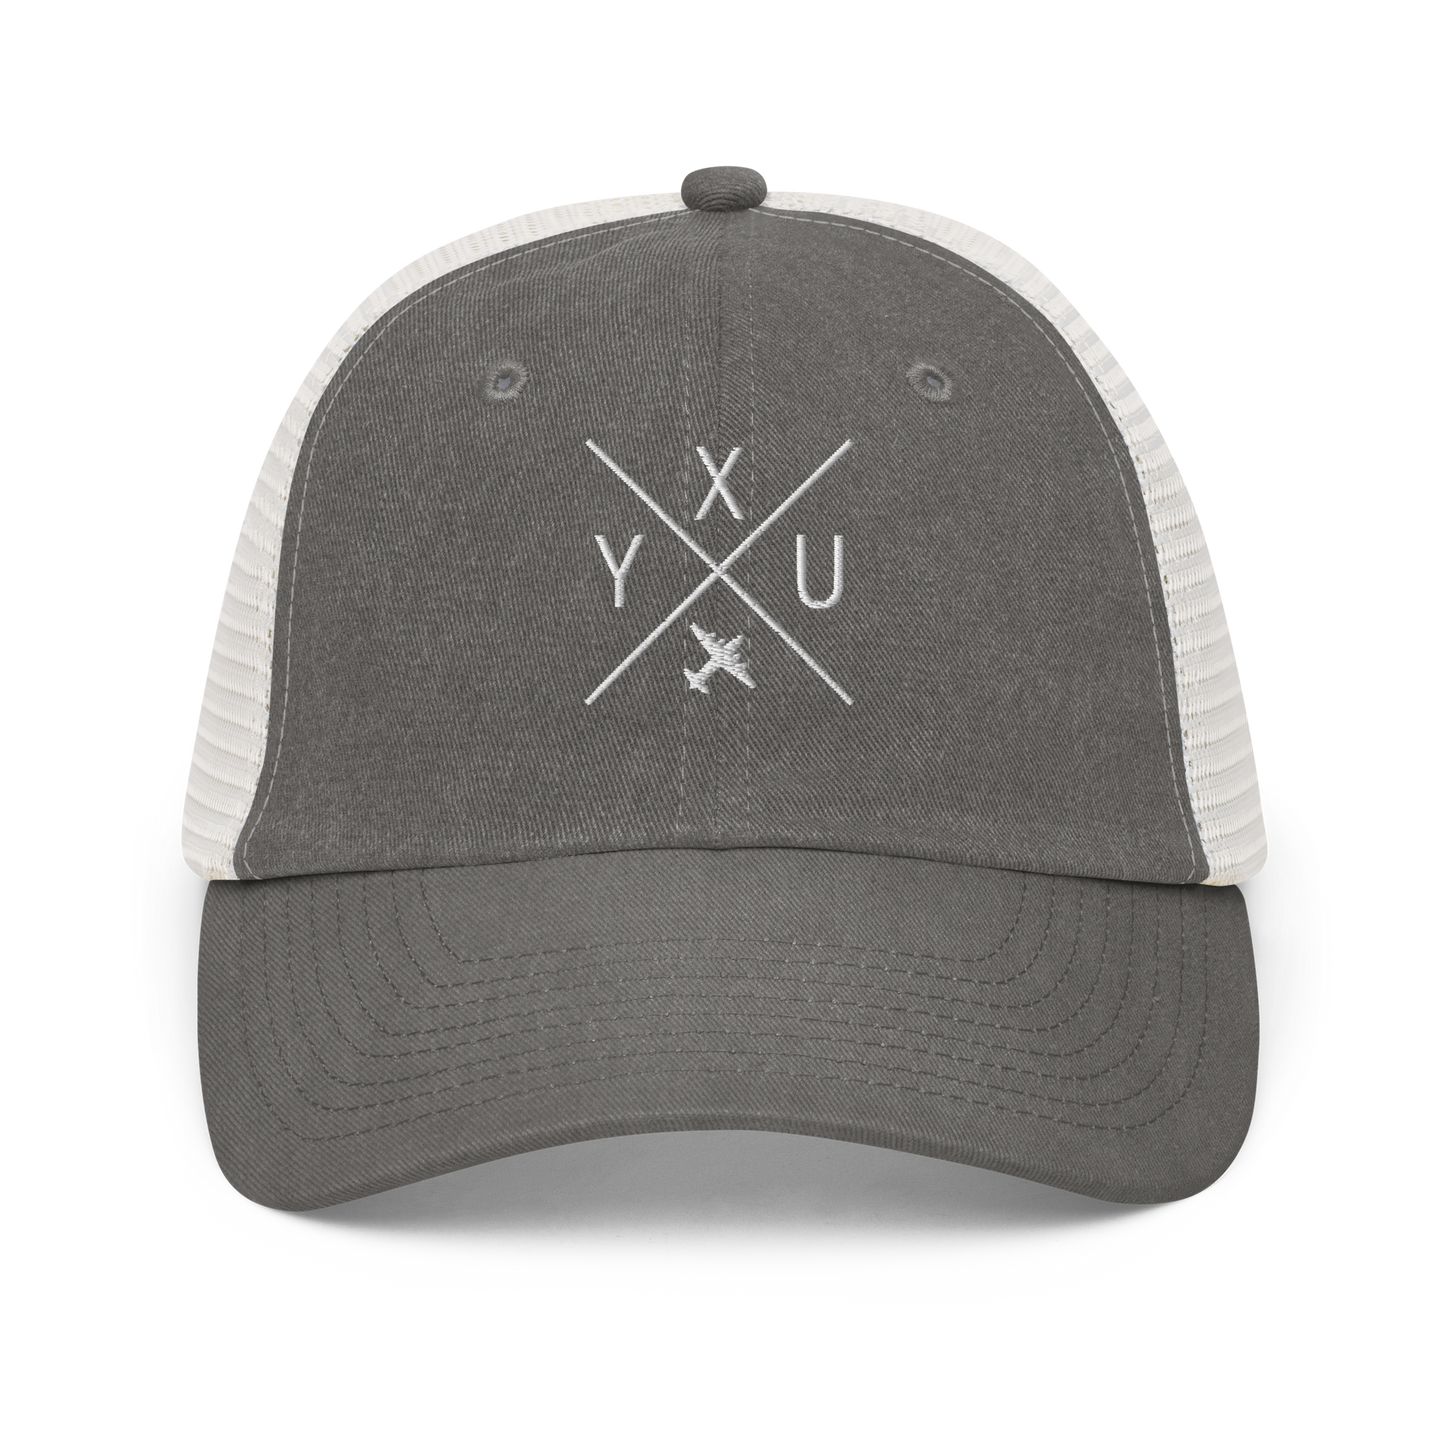 YHM Designs - YXU London Pigment-Dyed Trucker Cap - Crossed-X Design with Airport Code and Vintage Propliner - White Embroidery - Image 09